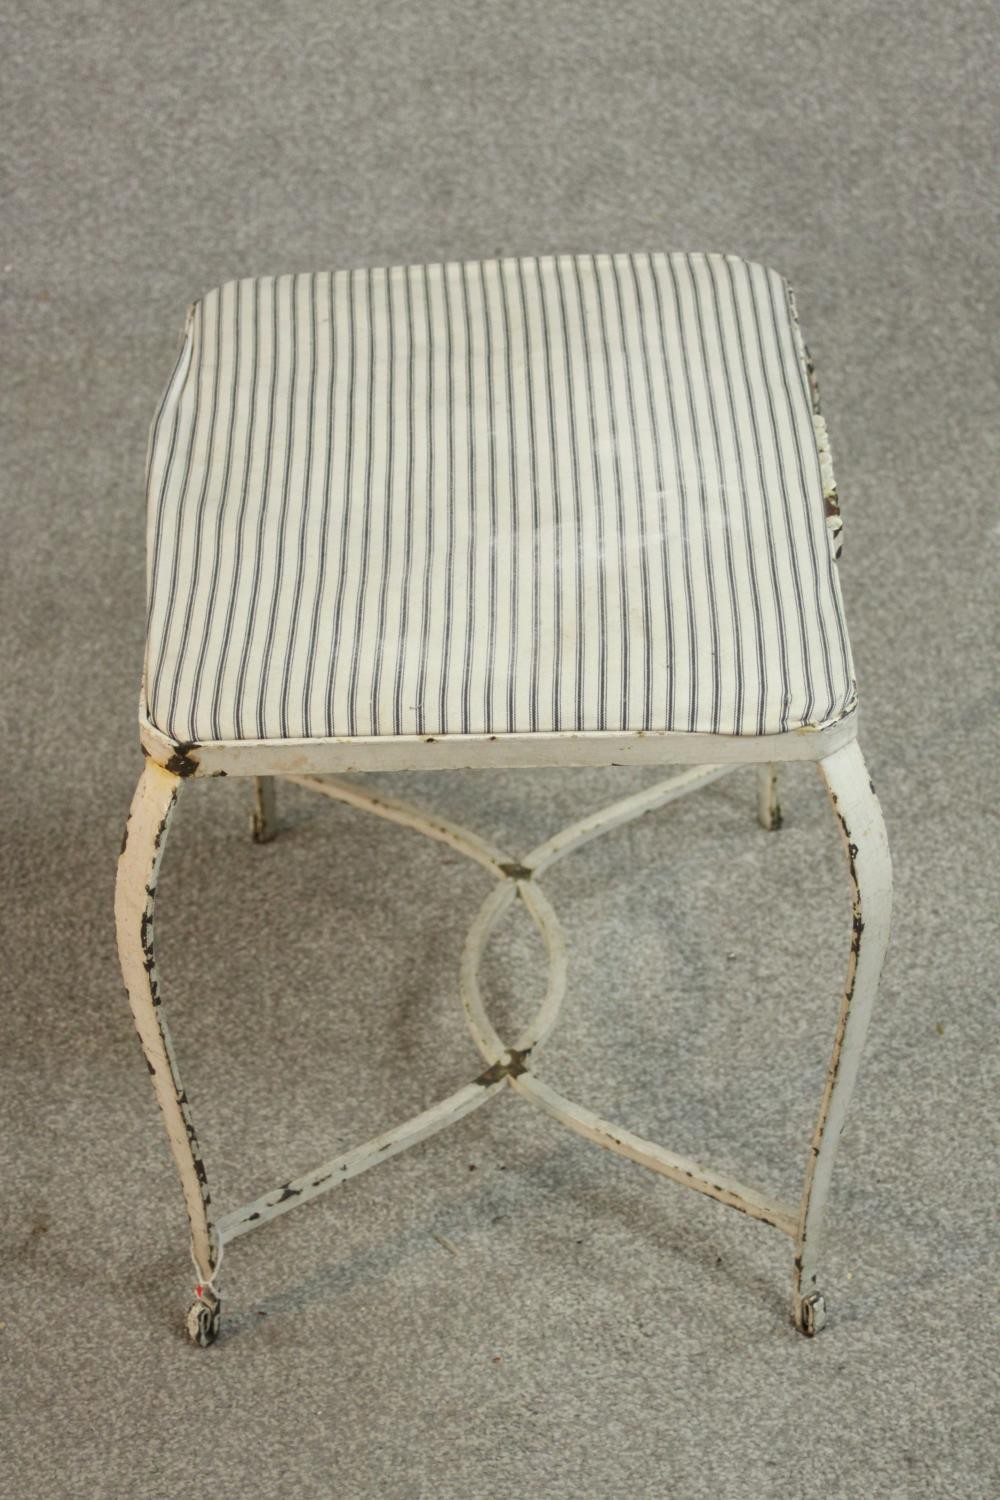 A white painted wrought iron stool, probably French, the seat upholstered in striped black and white - Image 4 of 5